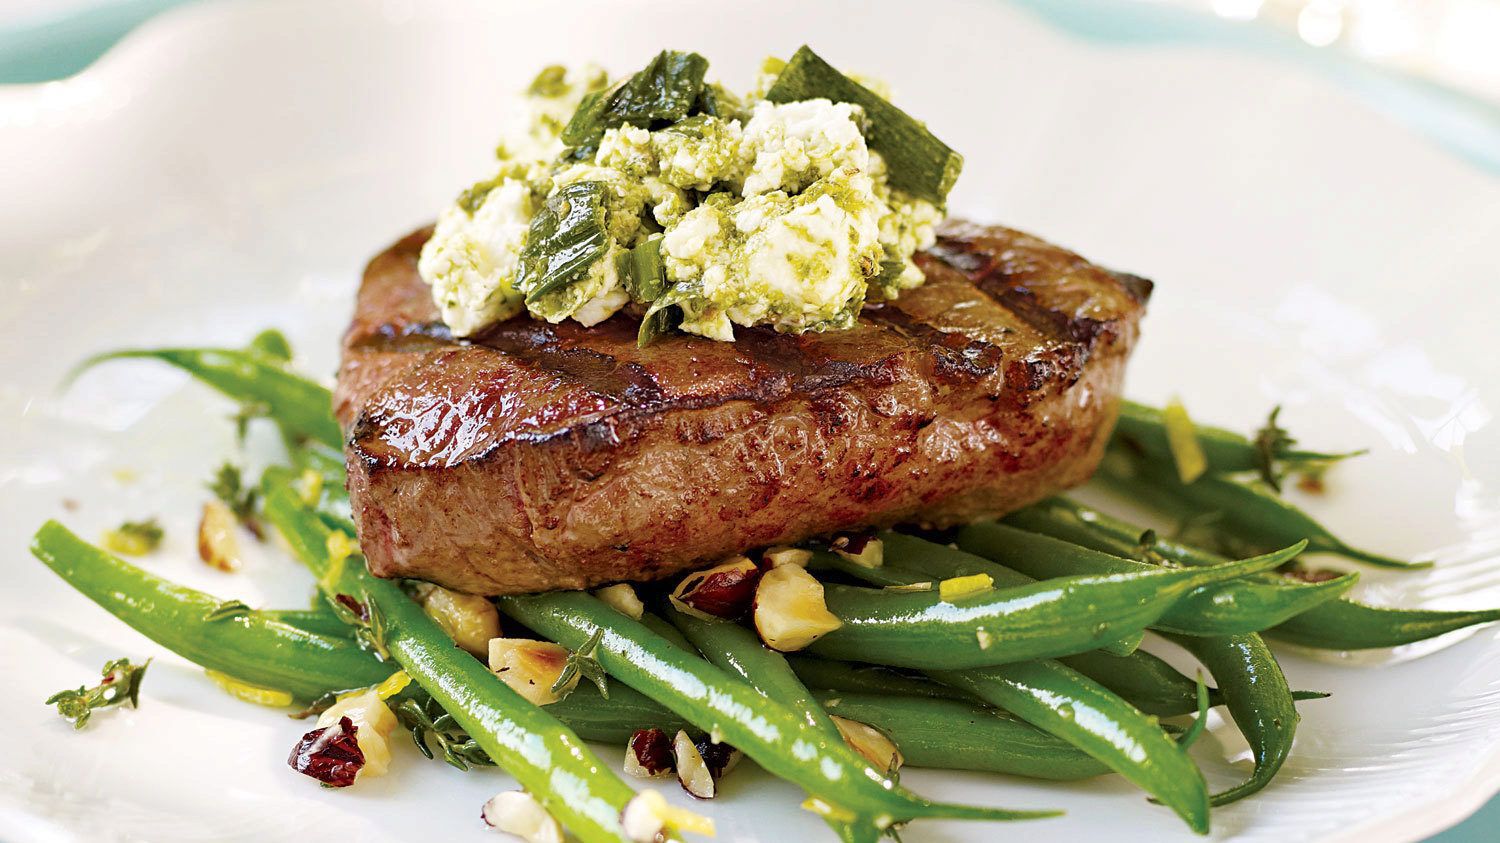 Grilled steak with green onion